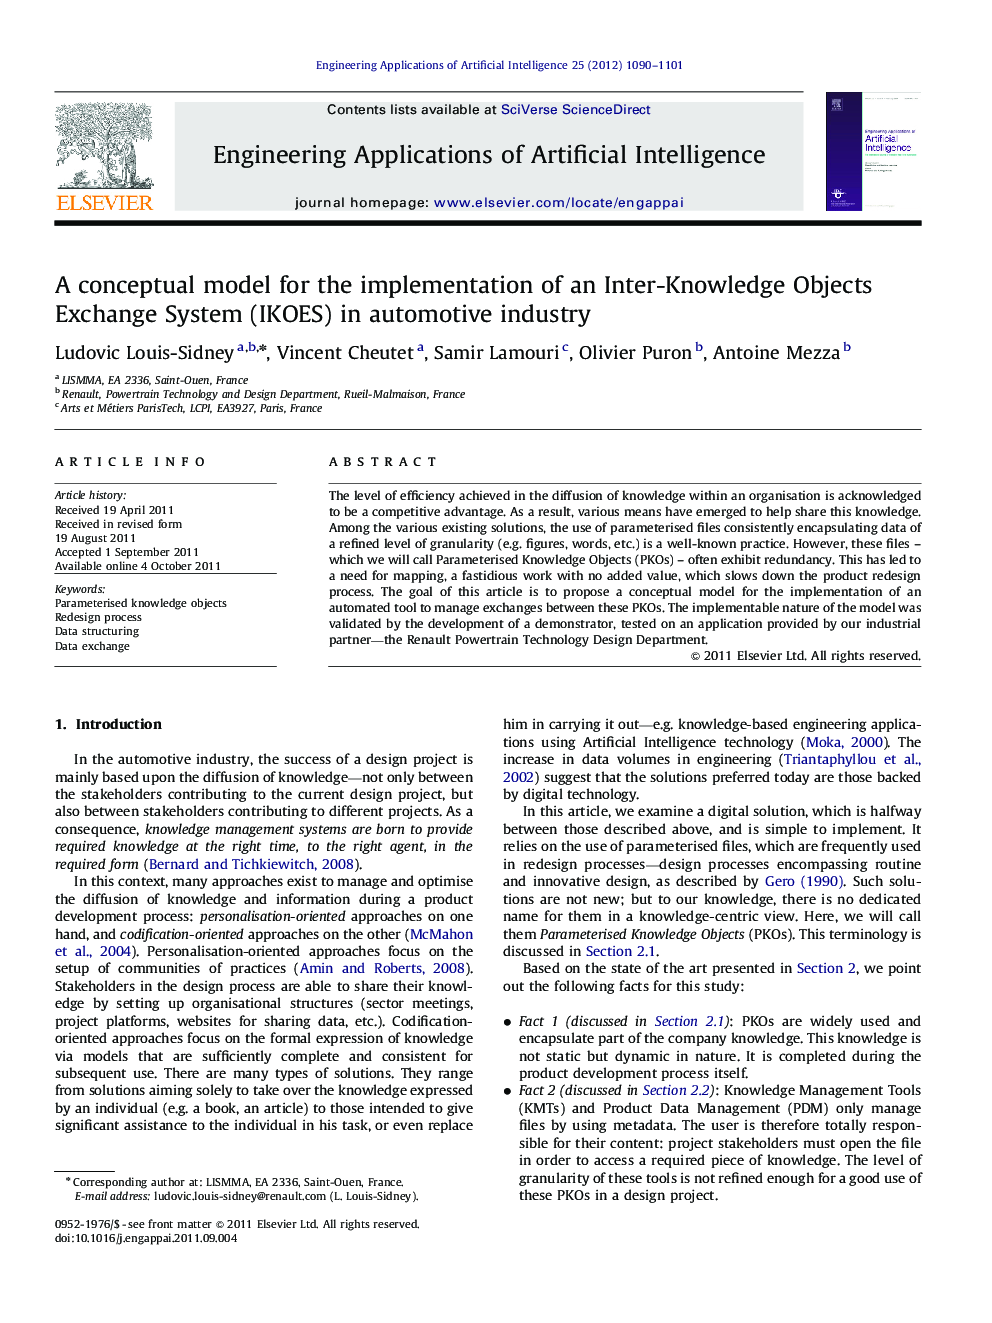 A conceptual model for the implementation of an Inter-Knowledge Objects Exchange System (IKOES) in automotive industry